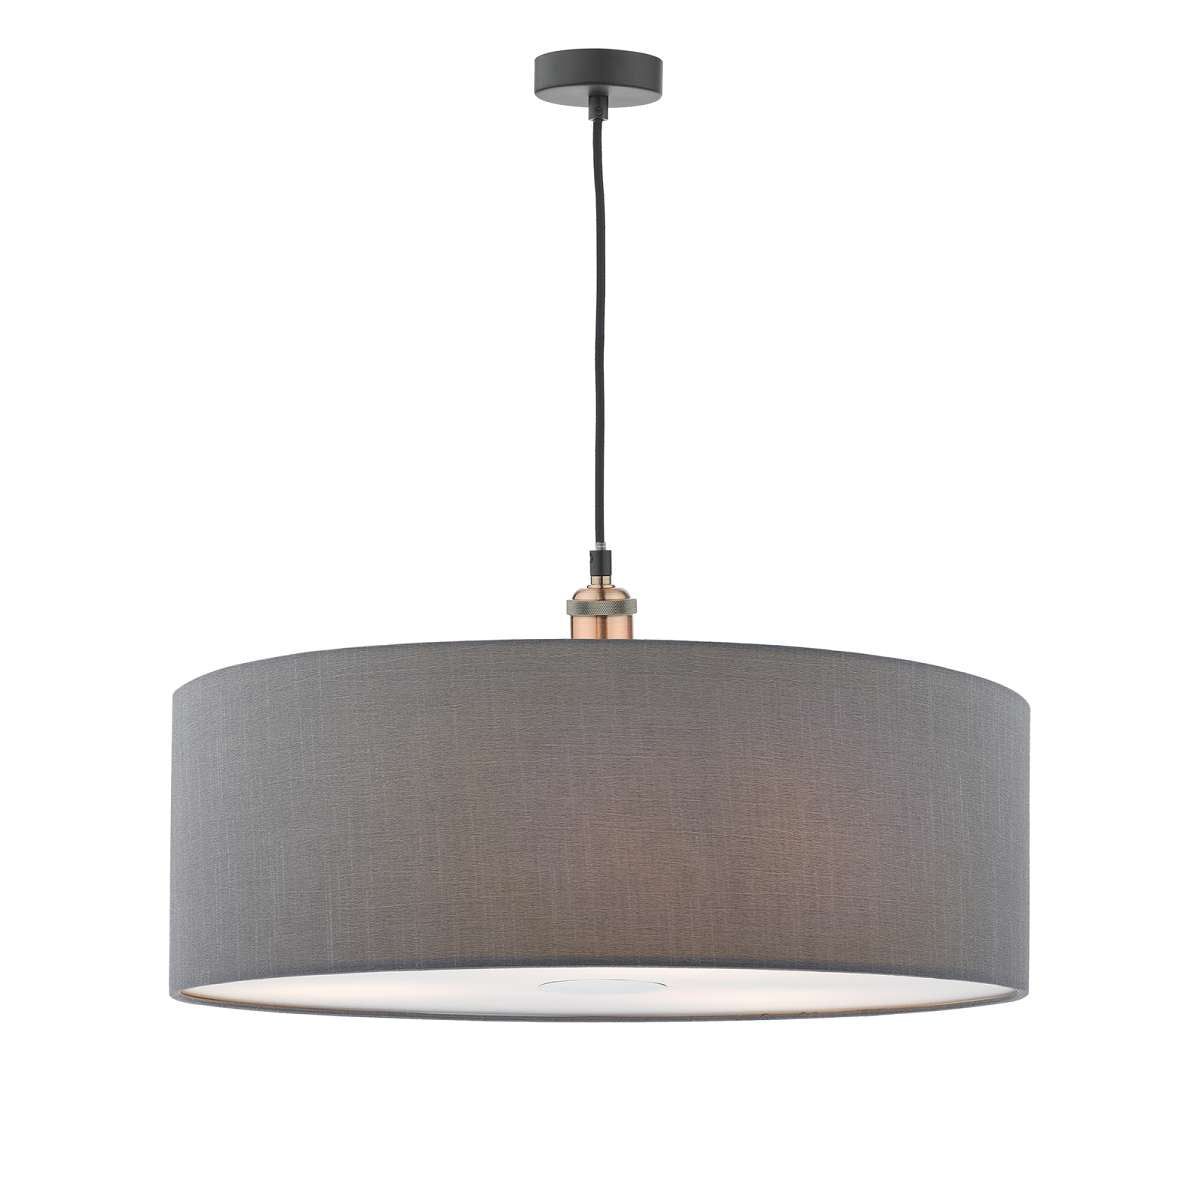 Ronda Easy Small Fit Shade And Diffuser Only Medium - Slate Grey Finish